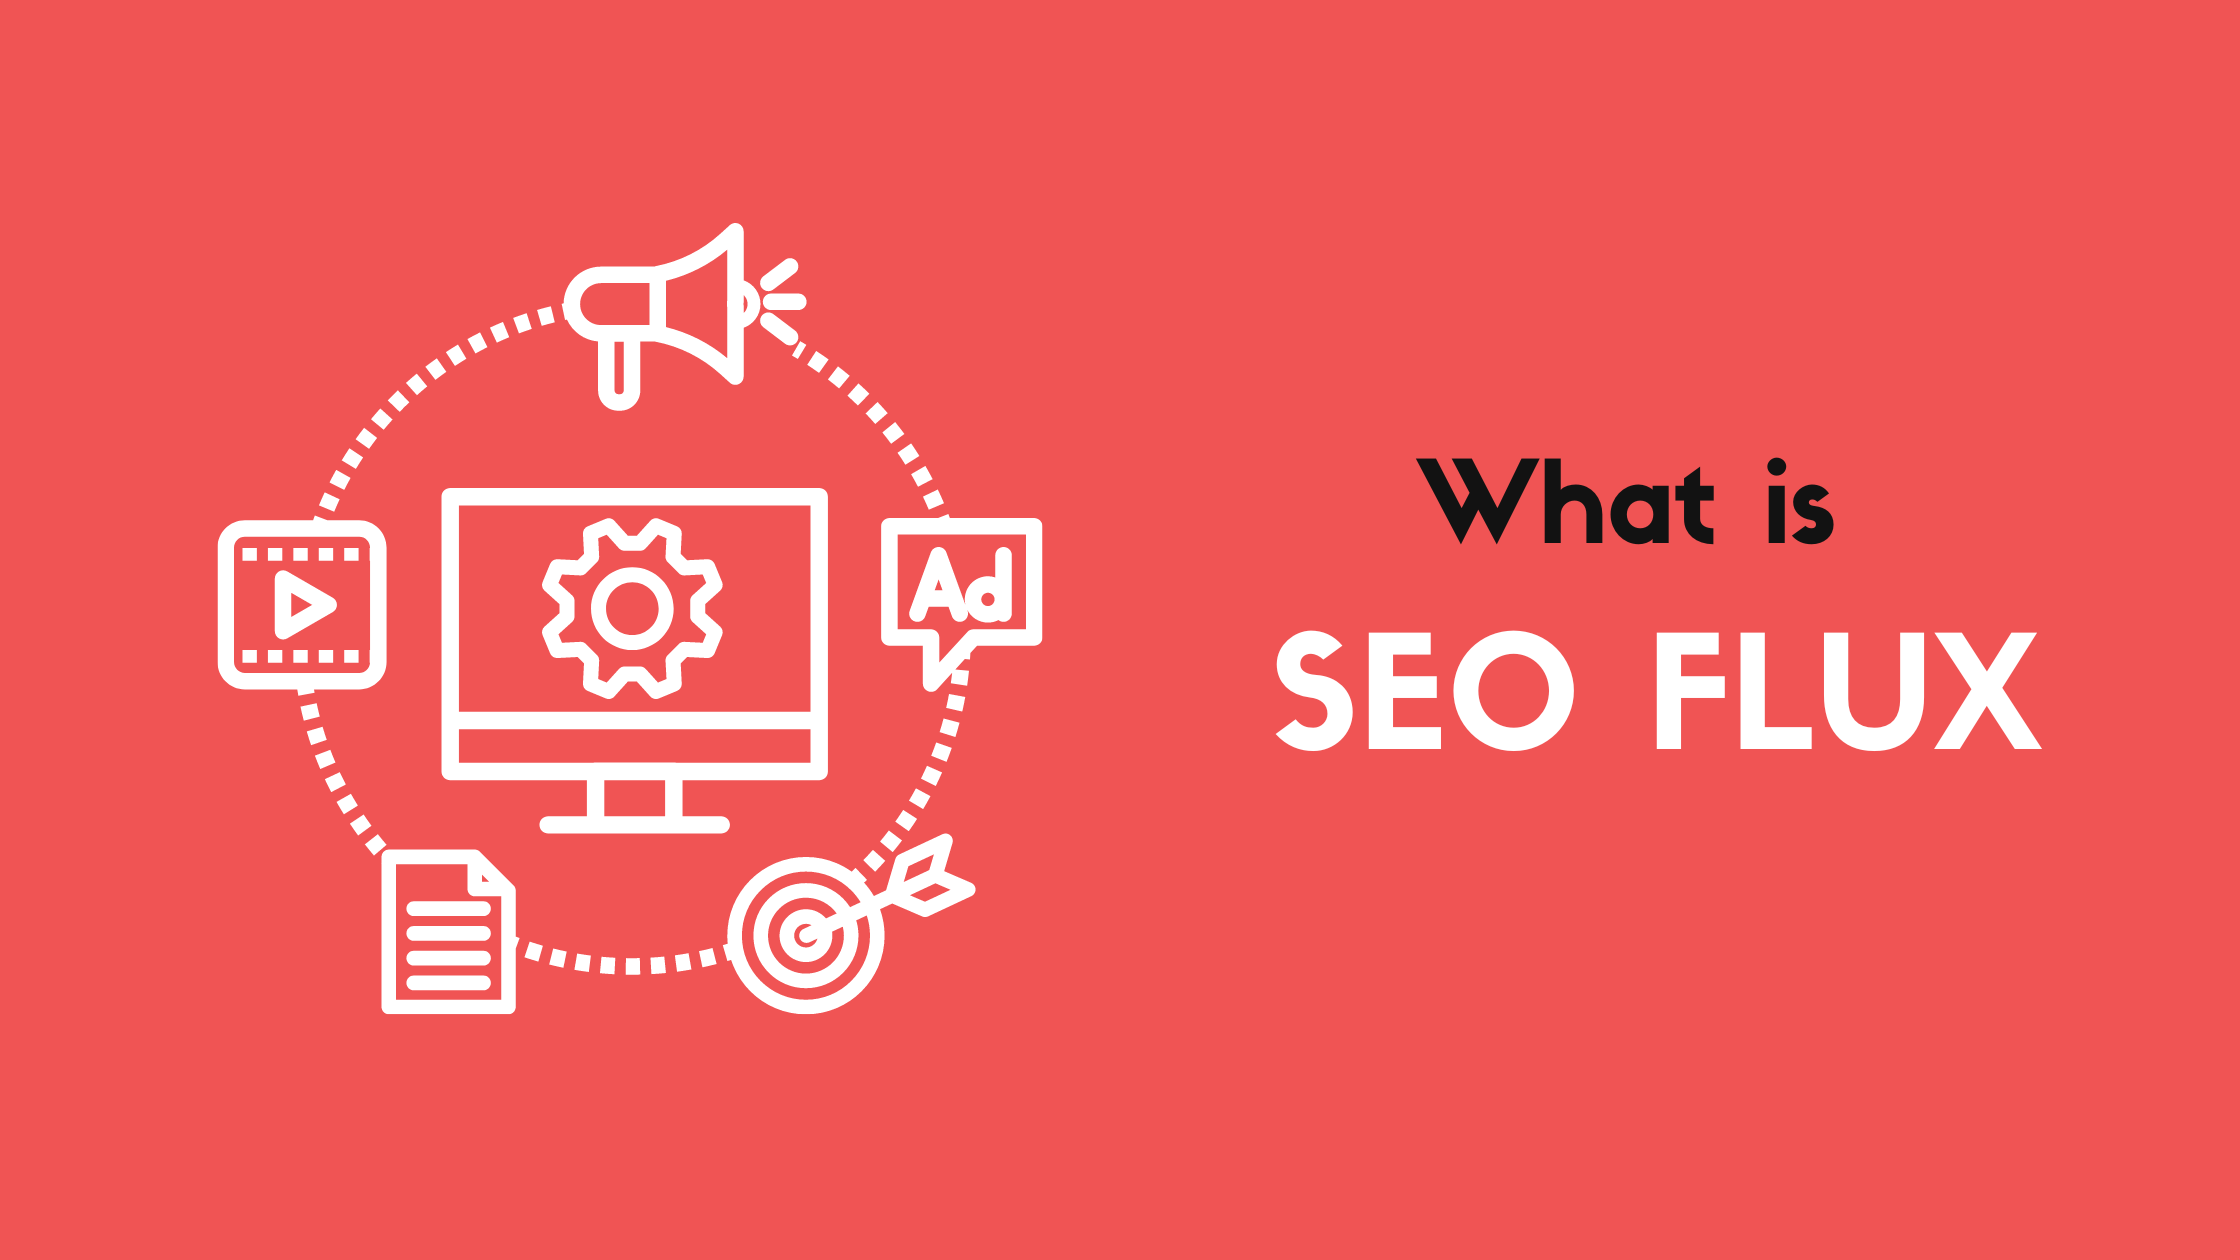 SEO Flux – What is SEO Flux and How to Optimize Website for Flux in SEO